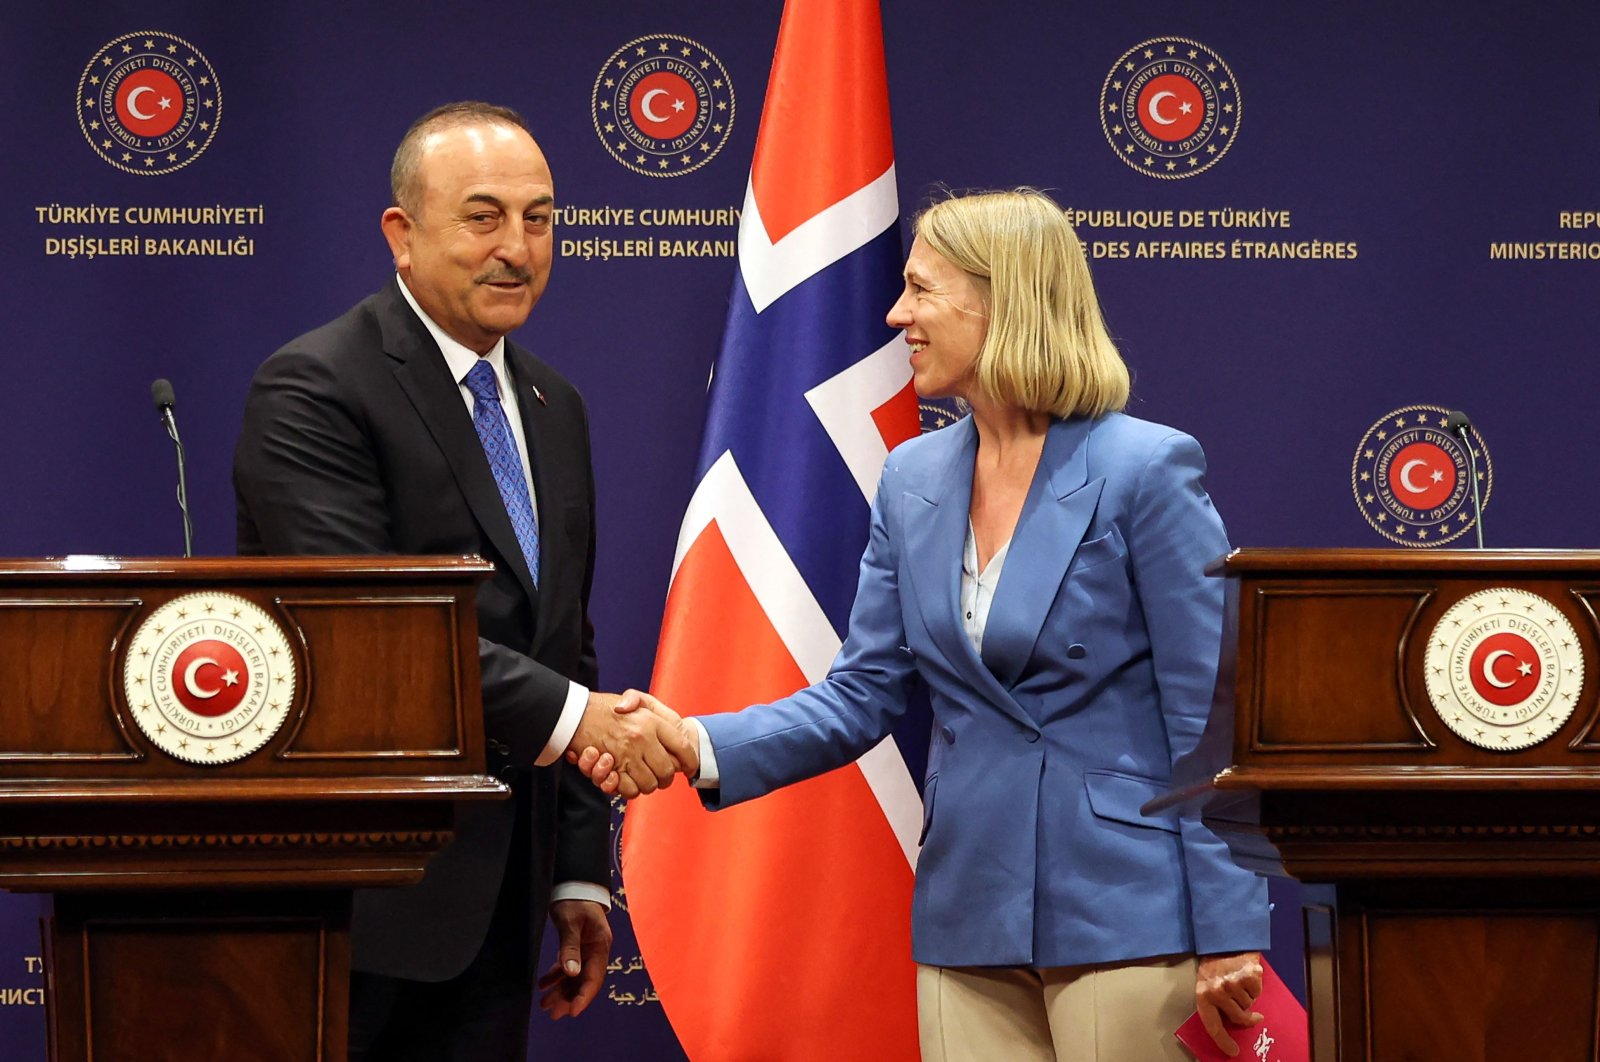 Turkish Foreign Minister Mevlut Cavusoglu (L) and Norwegian Foreign Minister Anniken Huitfeldt (R) shake hands as they hold a joint press conference in Ankara, Turkey, June 15, 2022. (AFP Photo)